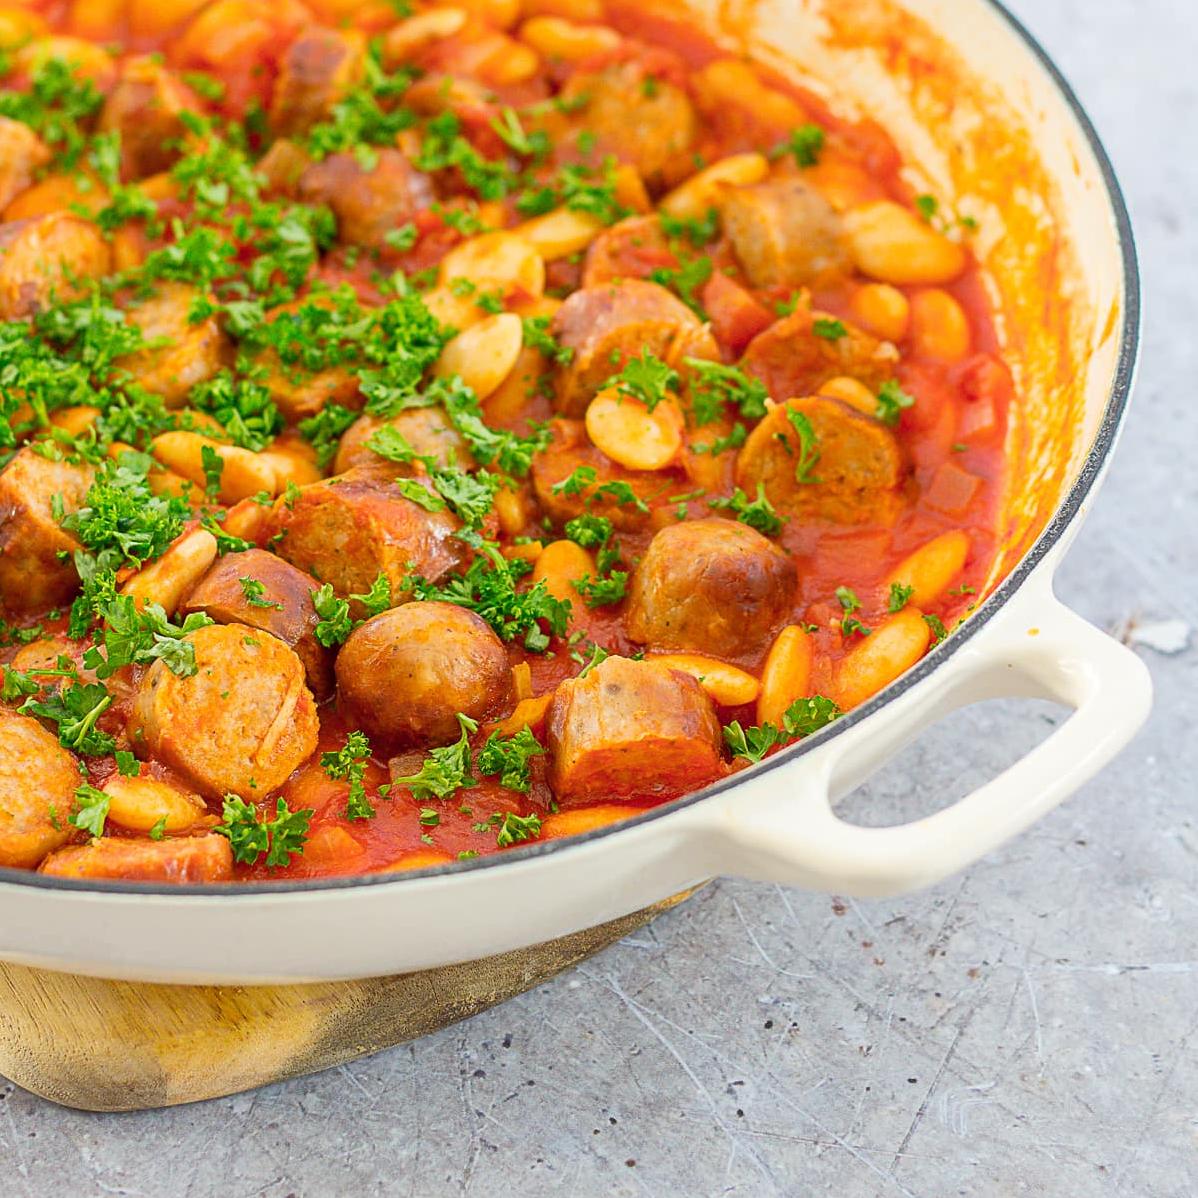  Sizzle up some comfort food with this savory sausage casserole.